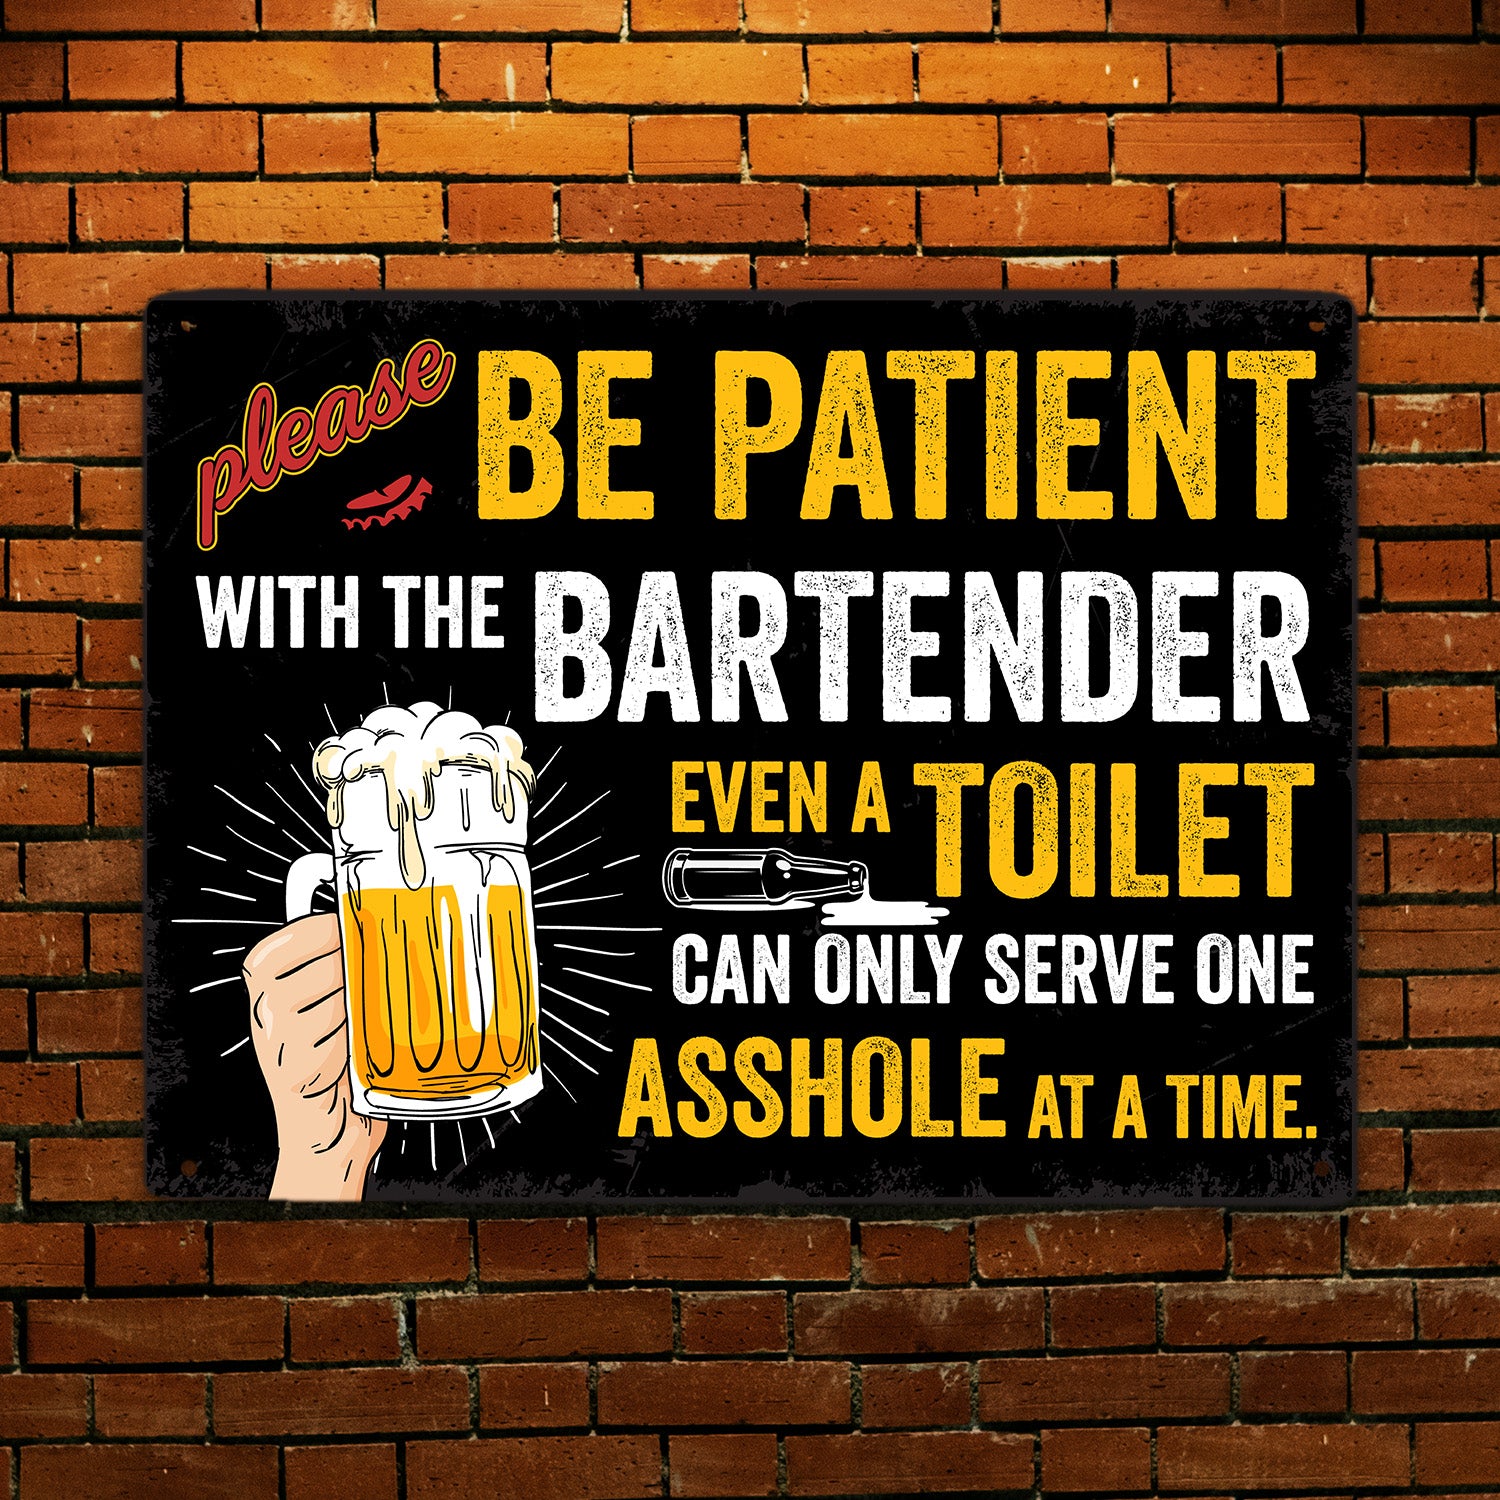 Please Be Patient With The Bartender-MetalSign-AllBranch-Veterans Nation